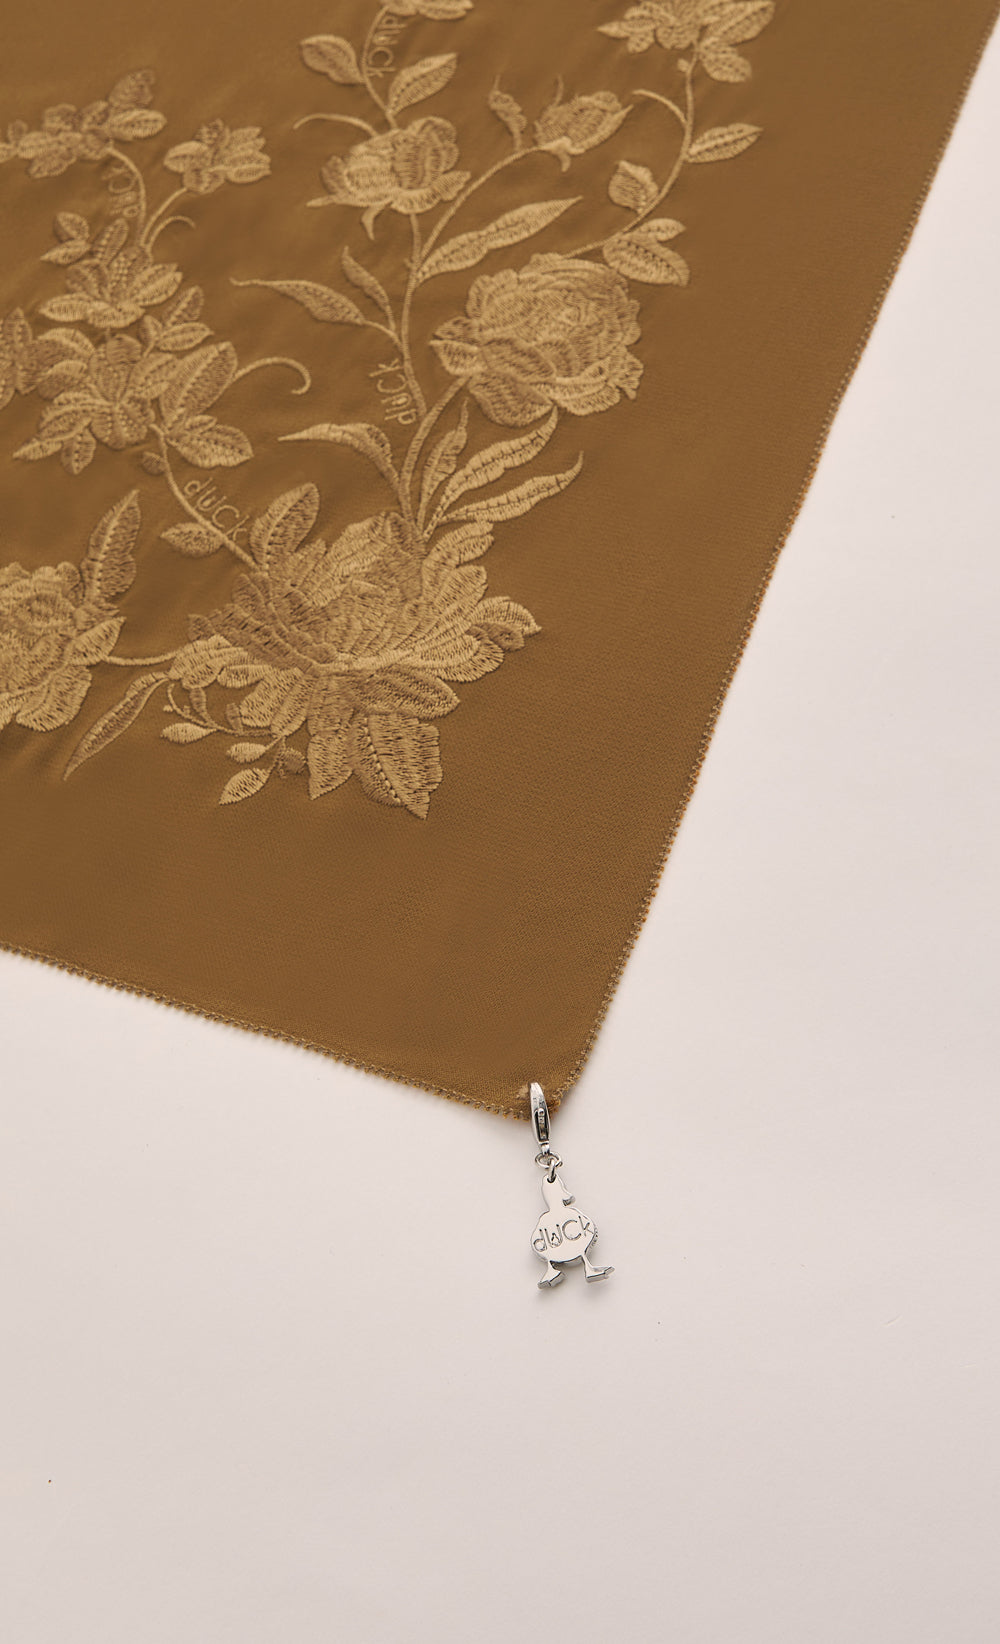 The Peonies Embroidery dUCk Square Scarf in Caramel